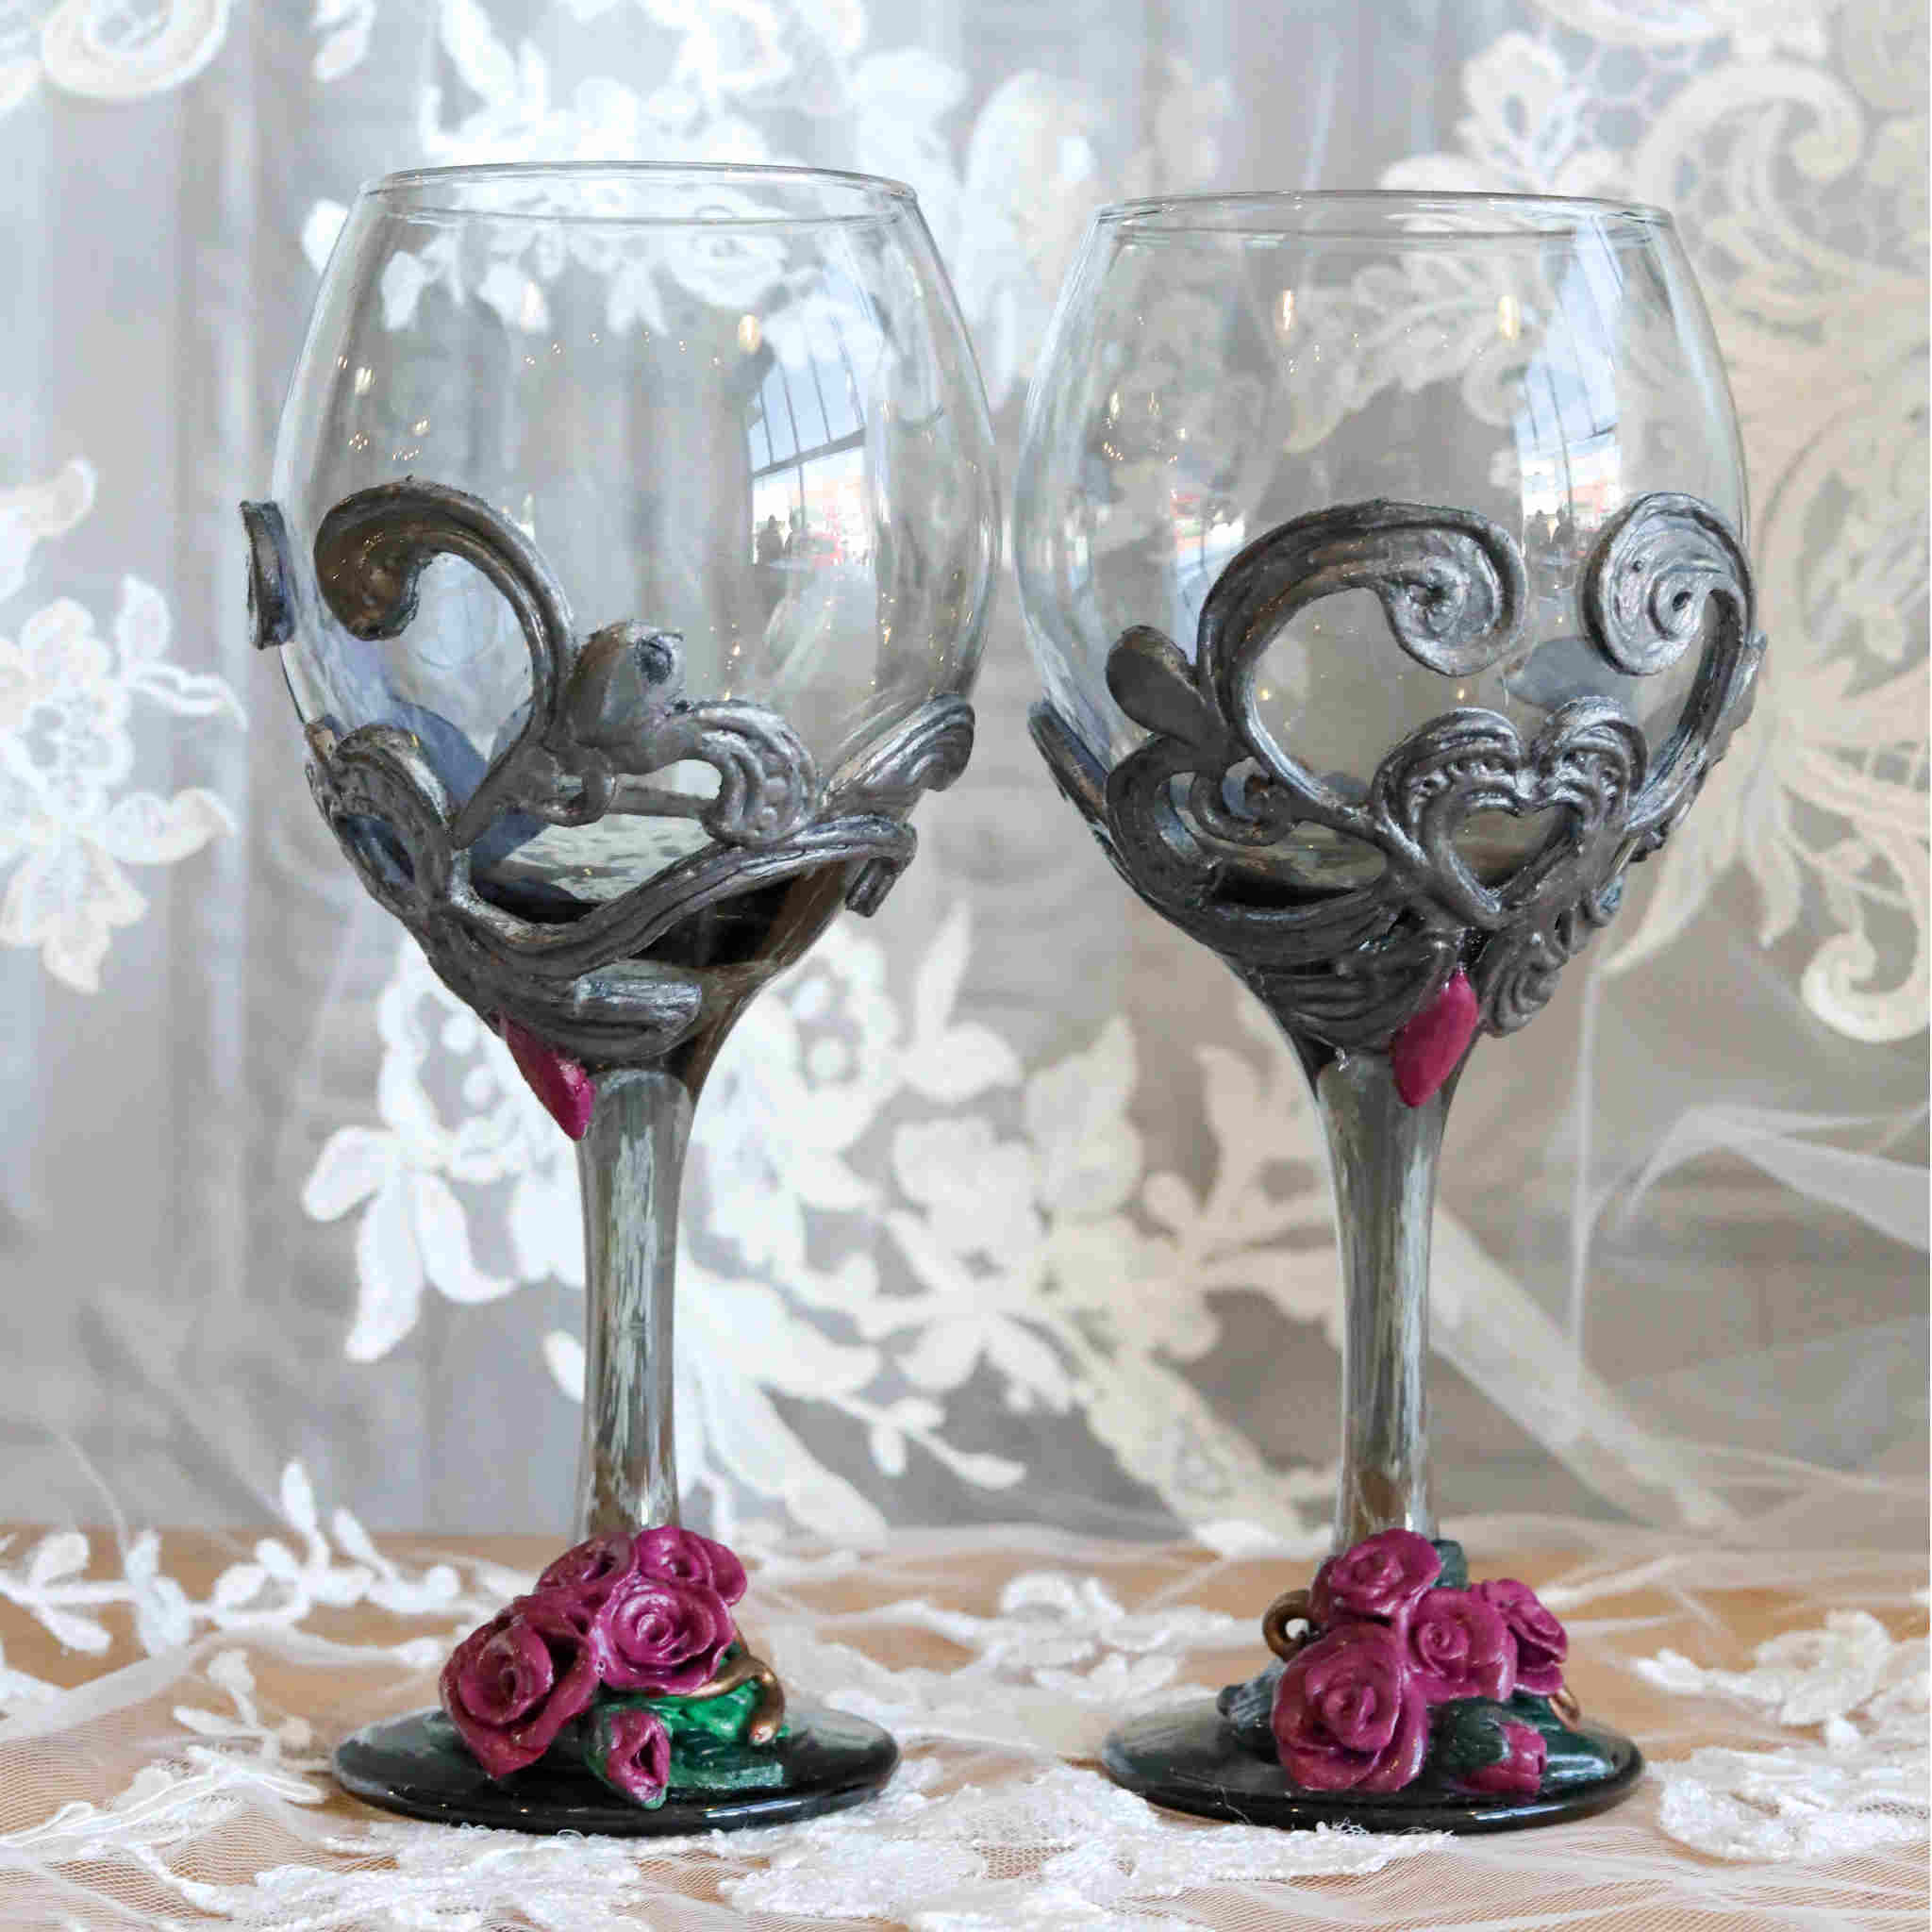 Victorian Wine Glass Set - Decorative Victorian Glass Gift Set for